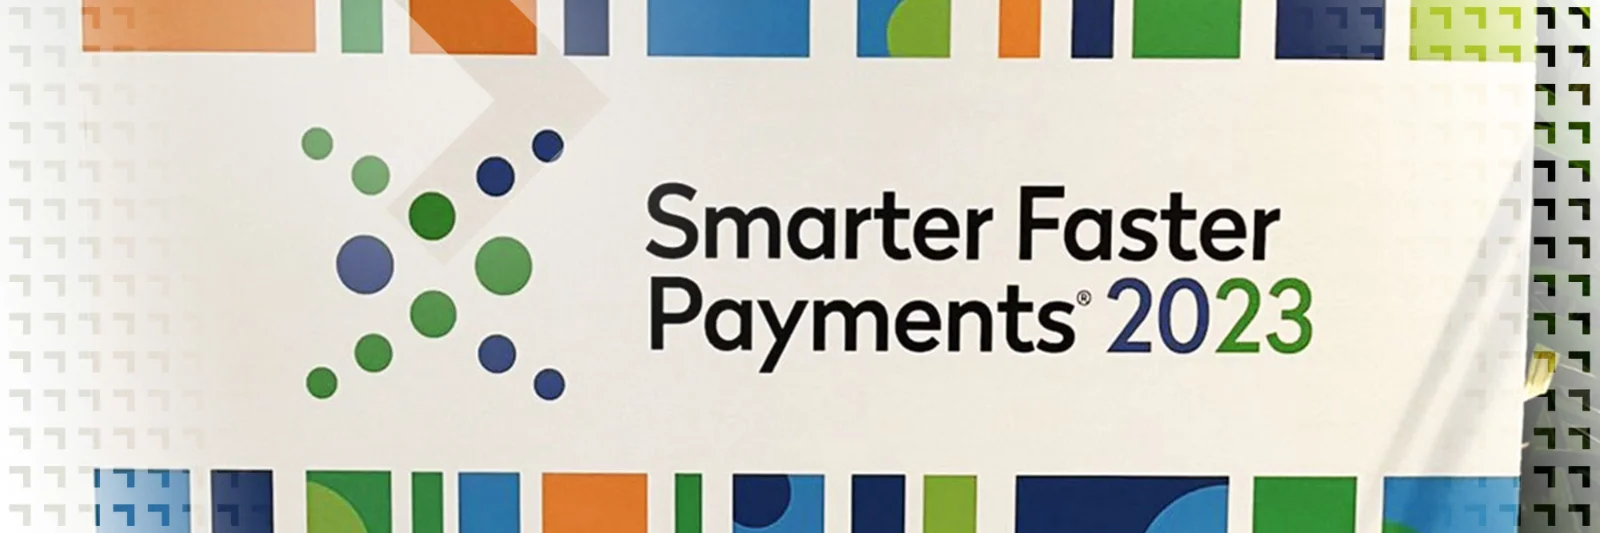 In case you missed it: Gain insights from Nacha Smarter Faster Payments on our US blog. Stay updated on payment innovations.